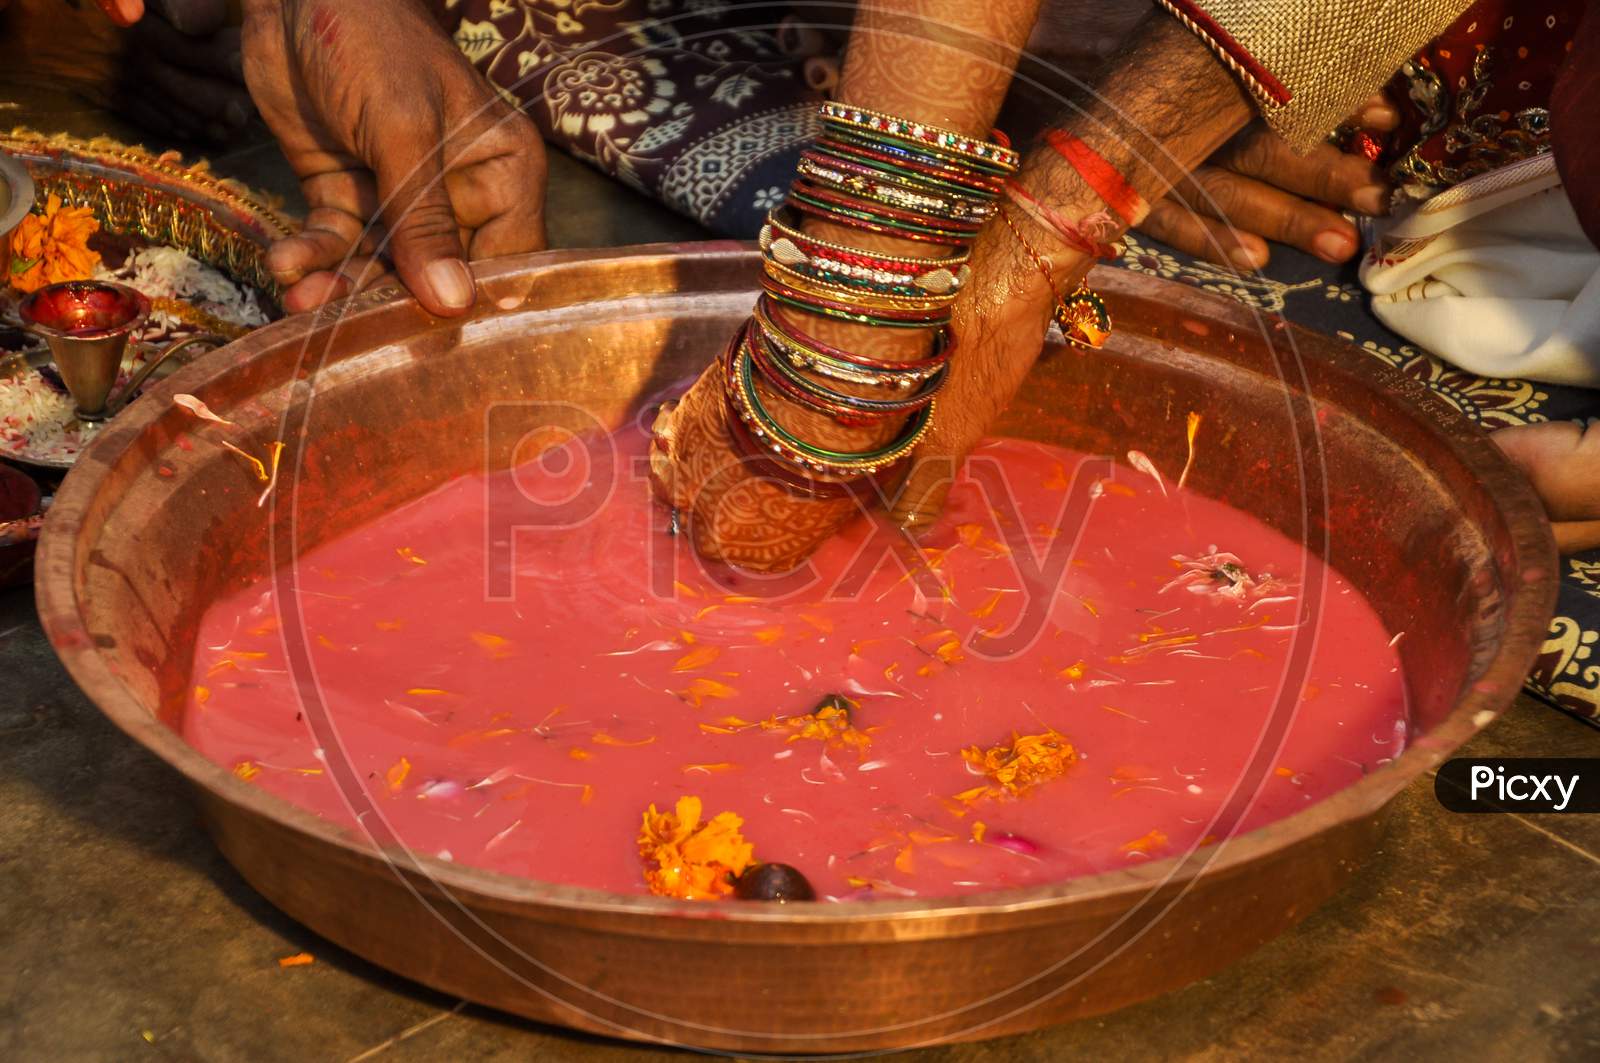 Indian Wedding Traditional Game Searching For Ring In Milk Plate.